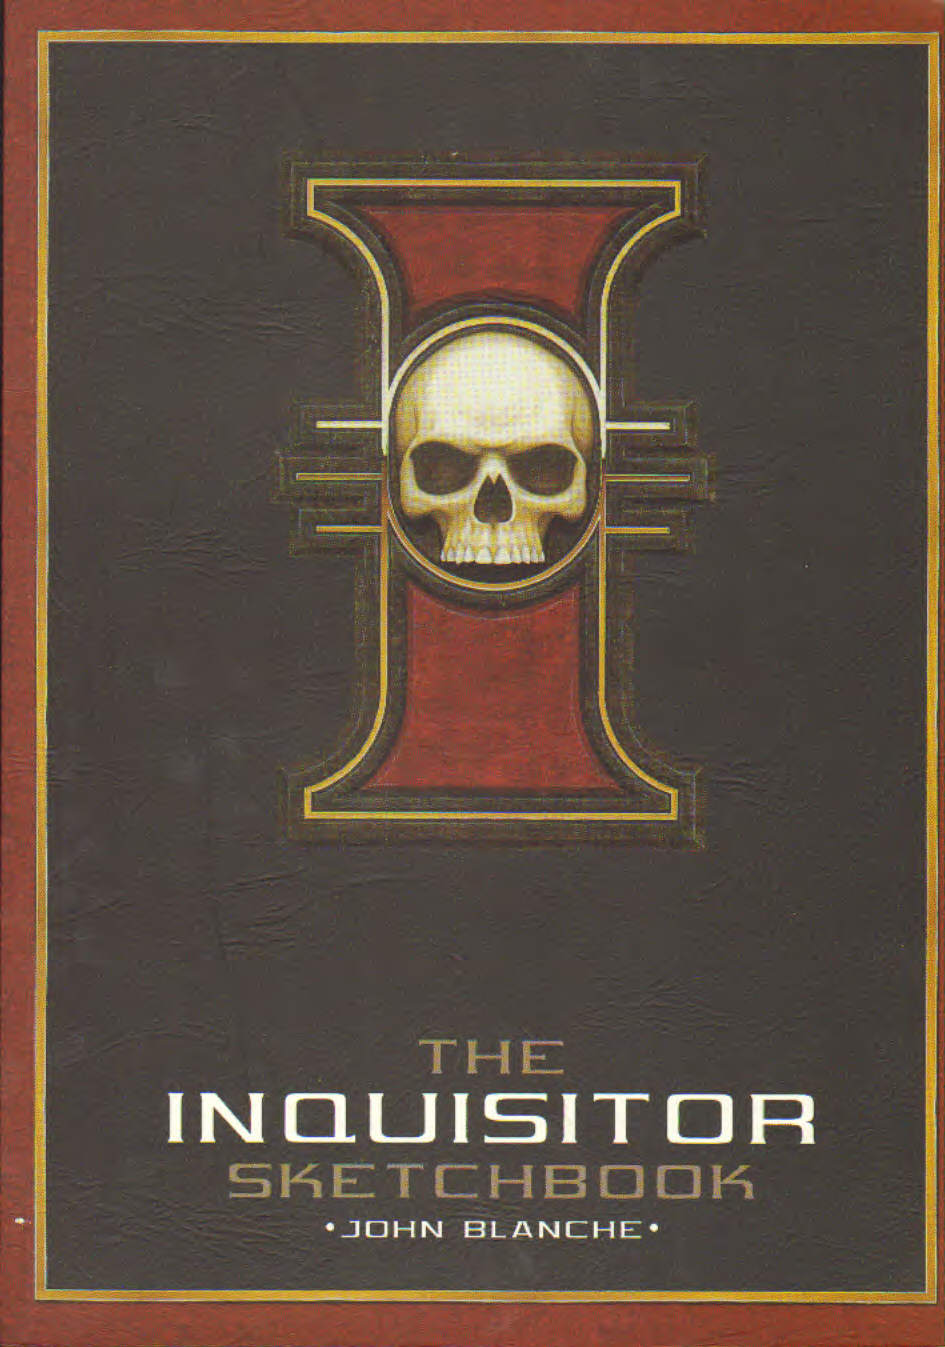 The Inquisitor Sketchbook - John Blanche